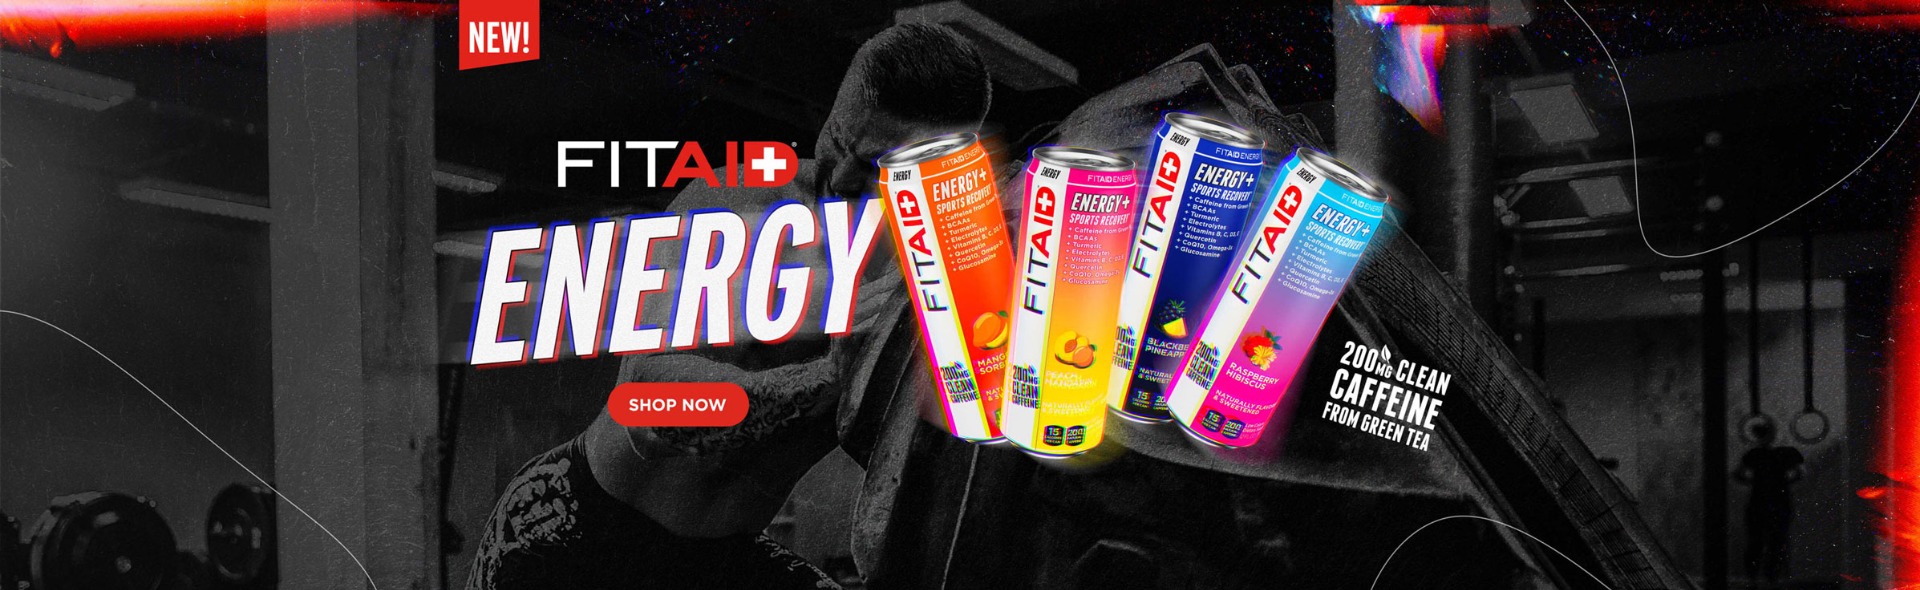 NEW FITAID Energy Drink!